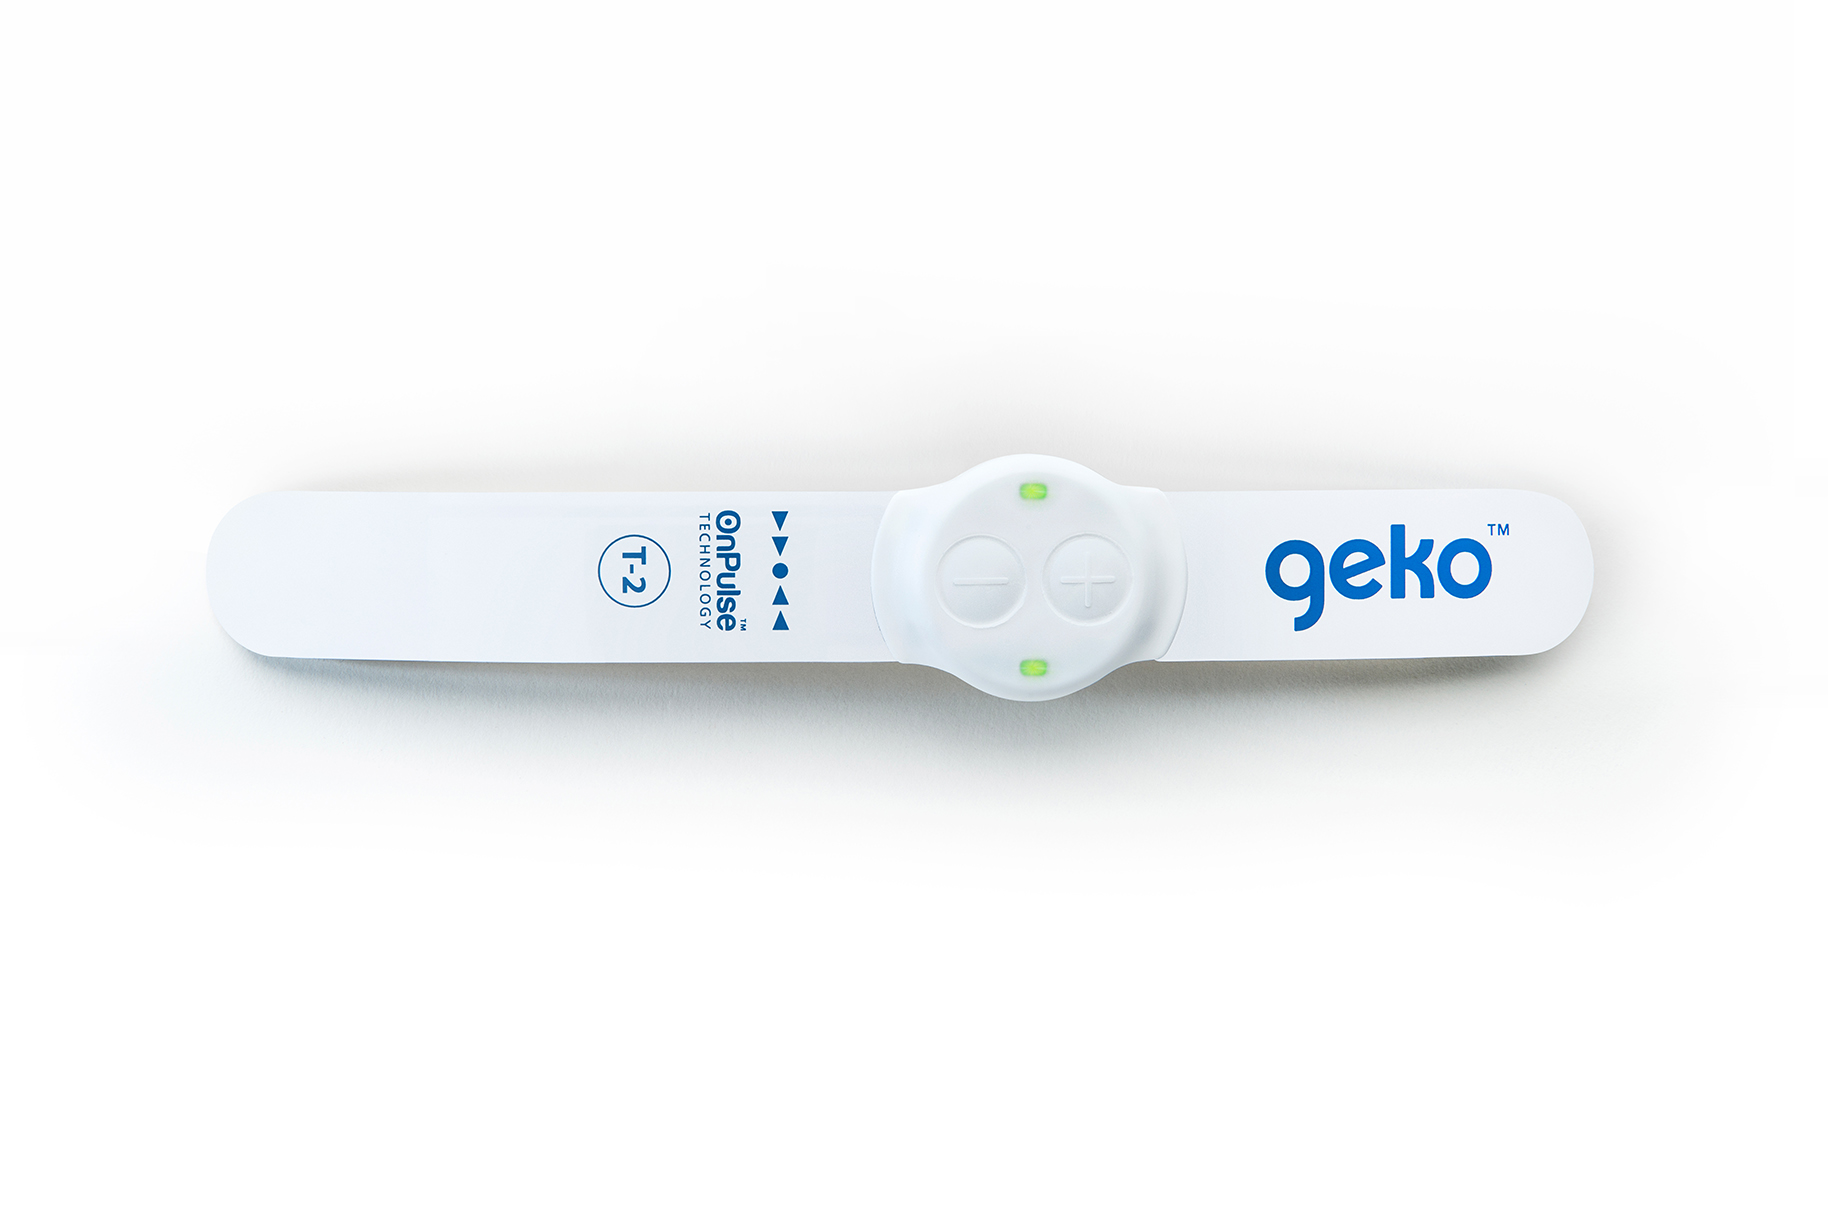 Geko circulation support device from FirstKind